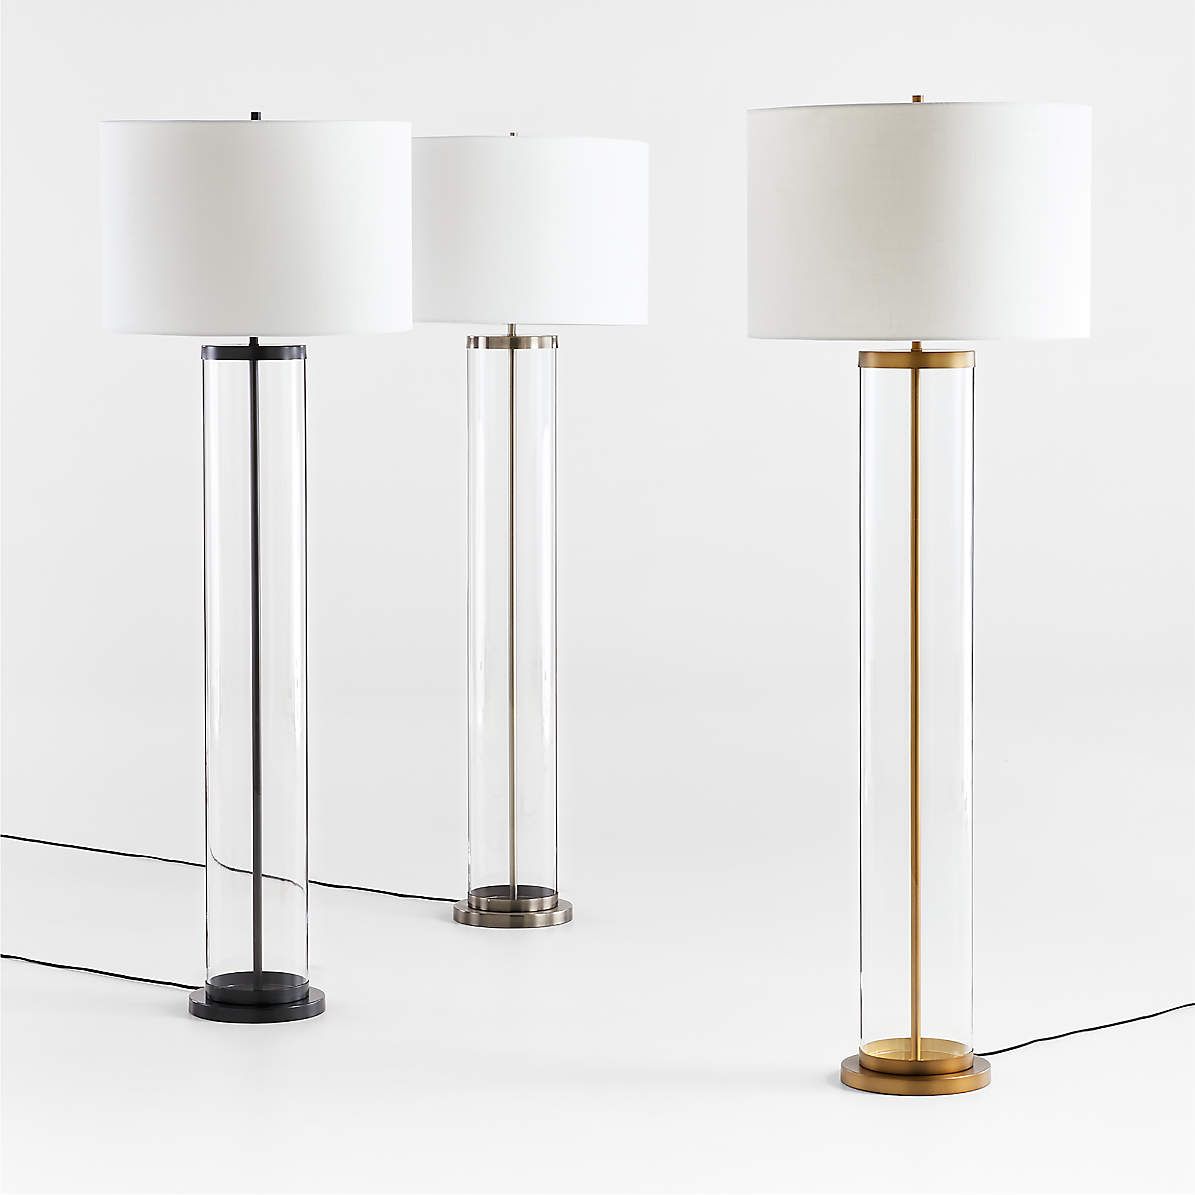 Promenade Floor Lamps With White Shades | Crate & Barrel For White Shade Floor Lamps (View 3 of 15)